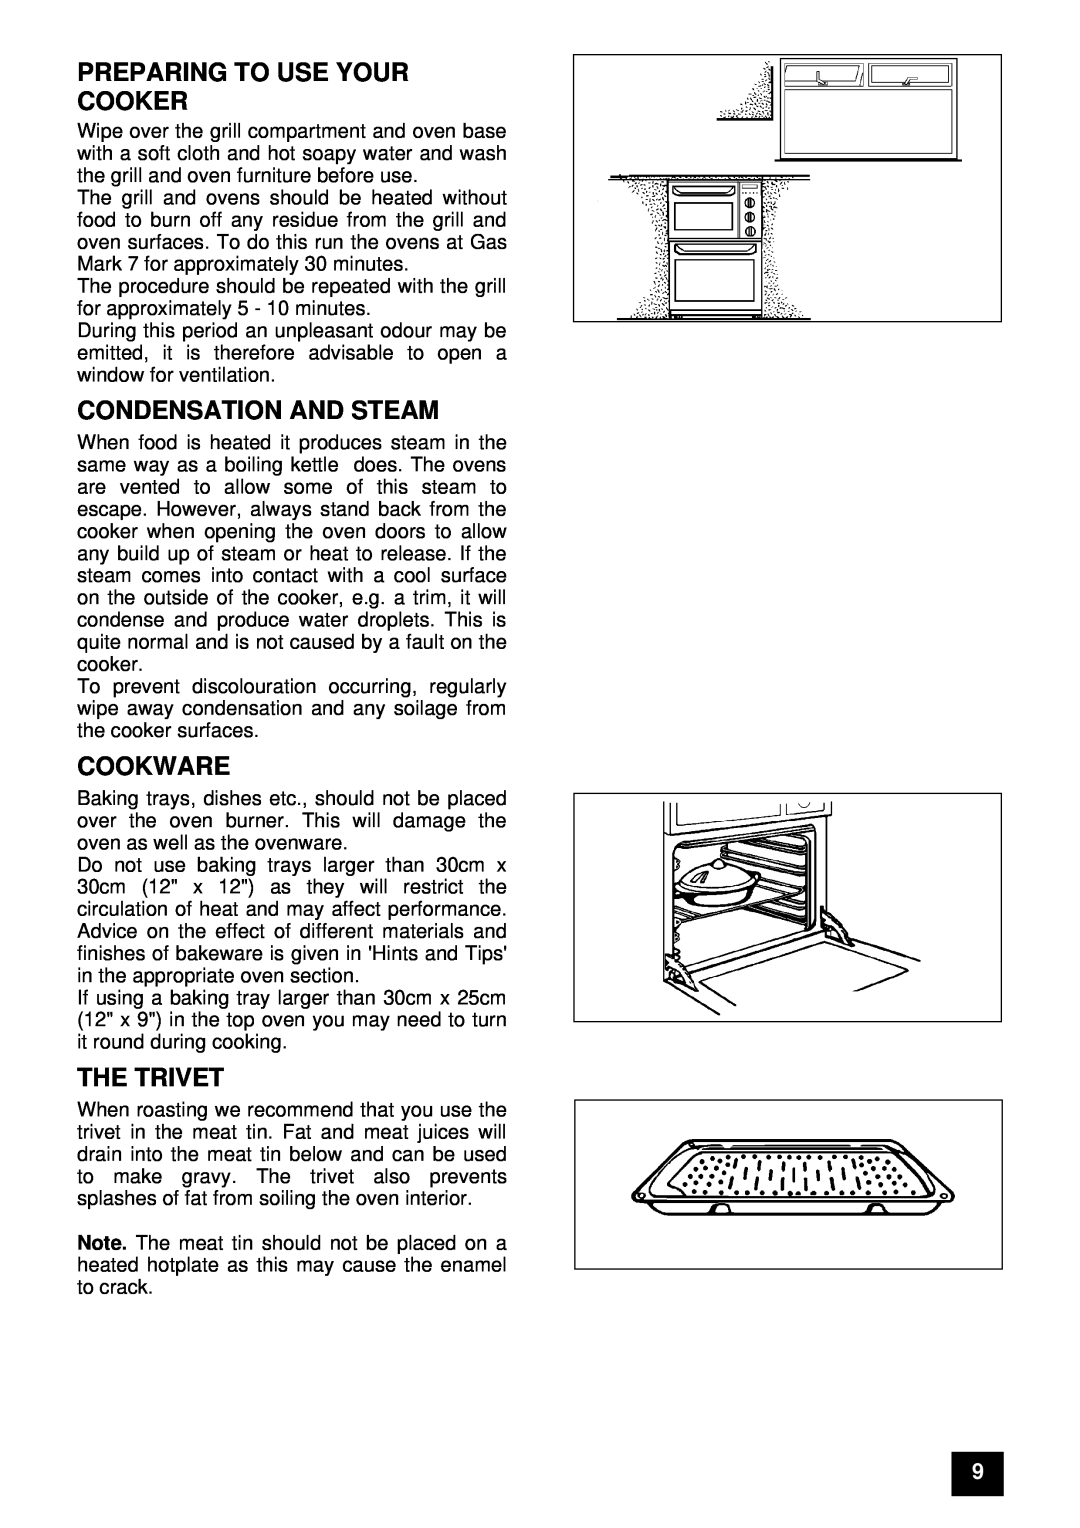 Zanussi ZUG 78 manual Preparing To Use Your Cooker, Condensation And Steam, Cookware, The Trivet 